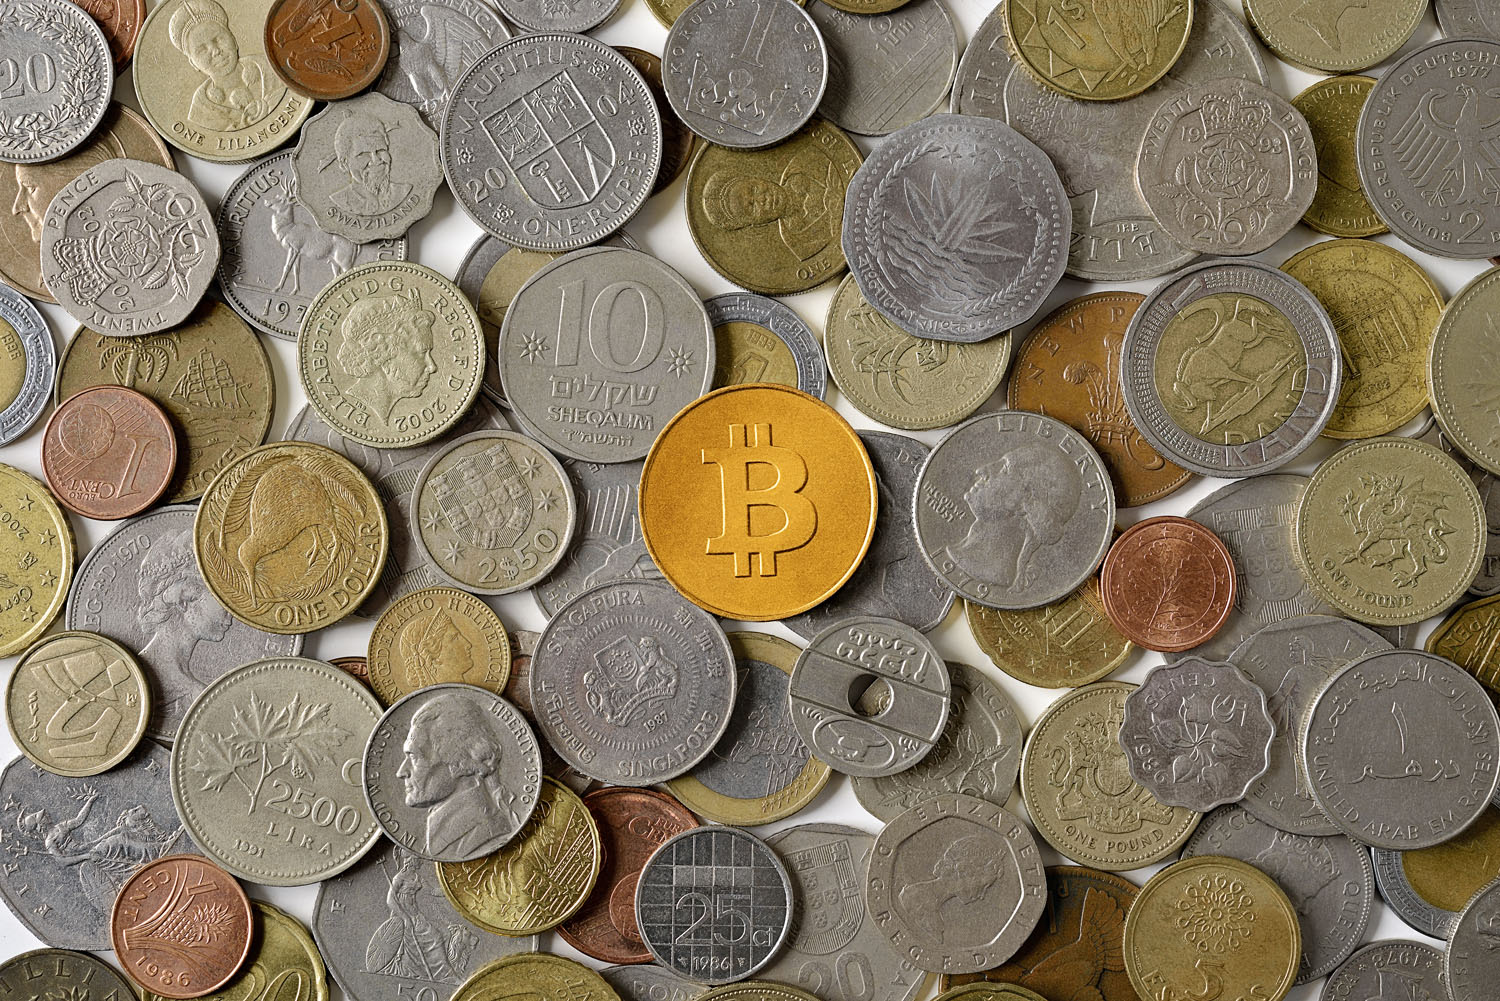 Bitcoin, center, is surrounded by various world coins.